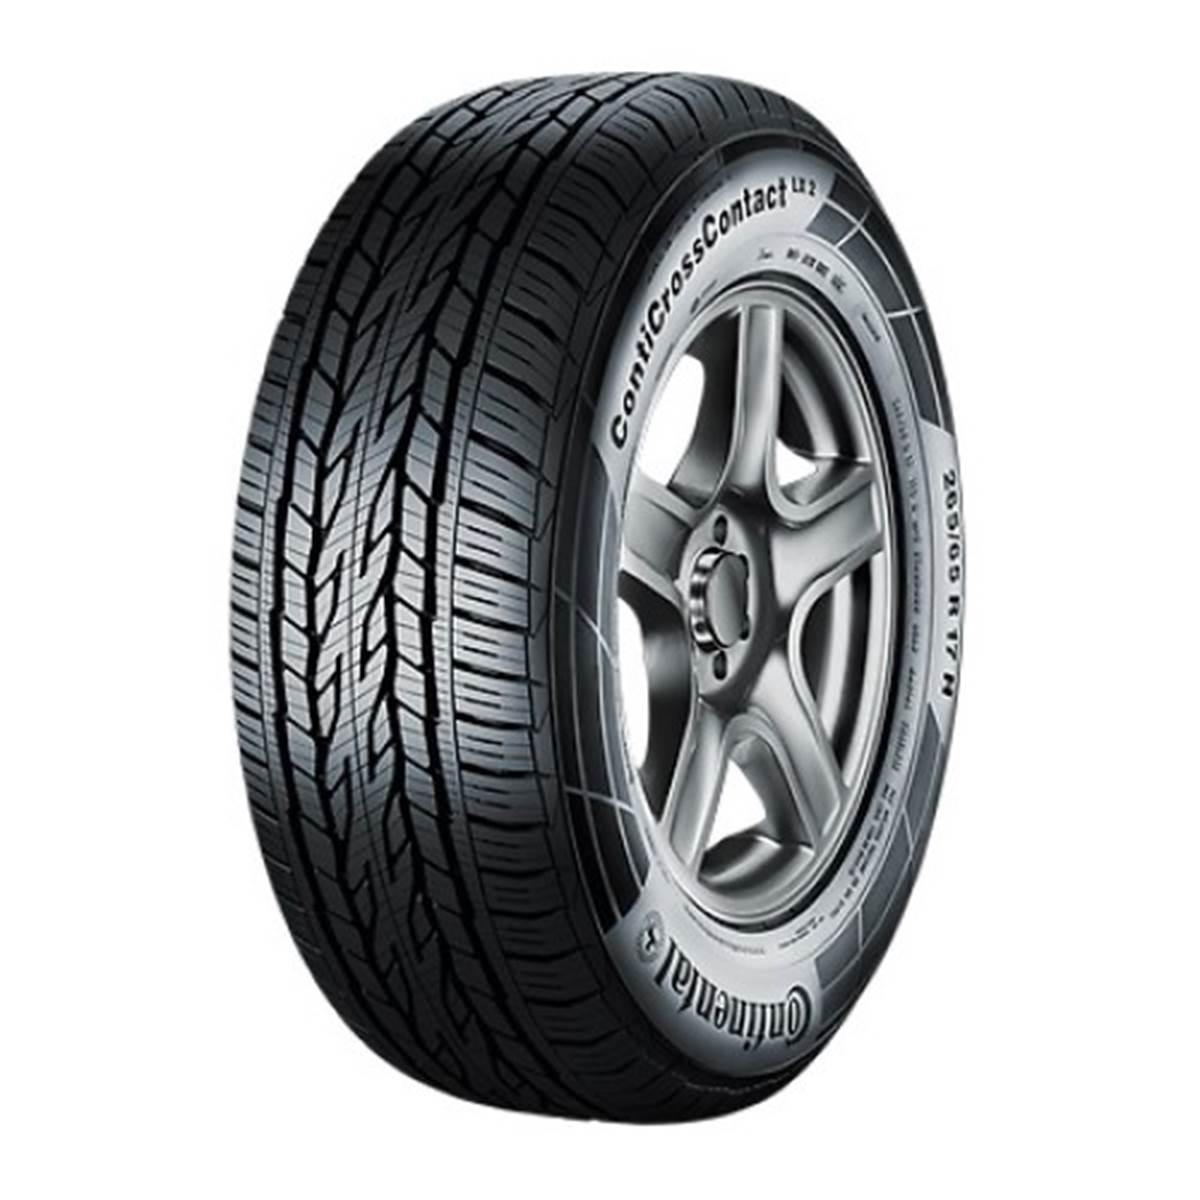 Continental Neumático  Conticrosscontact Lx 2 205/82R16 110S